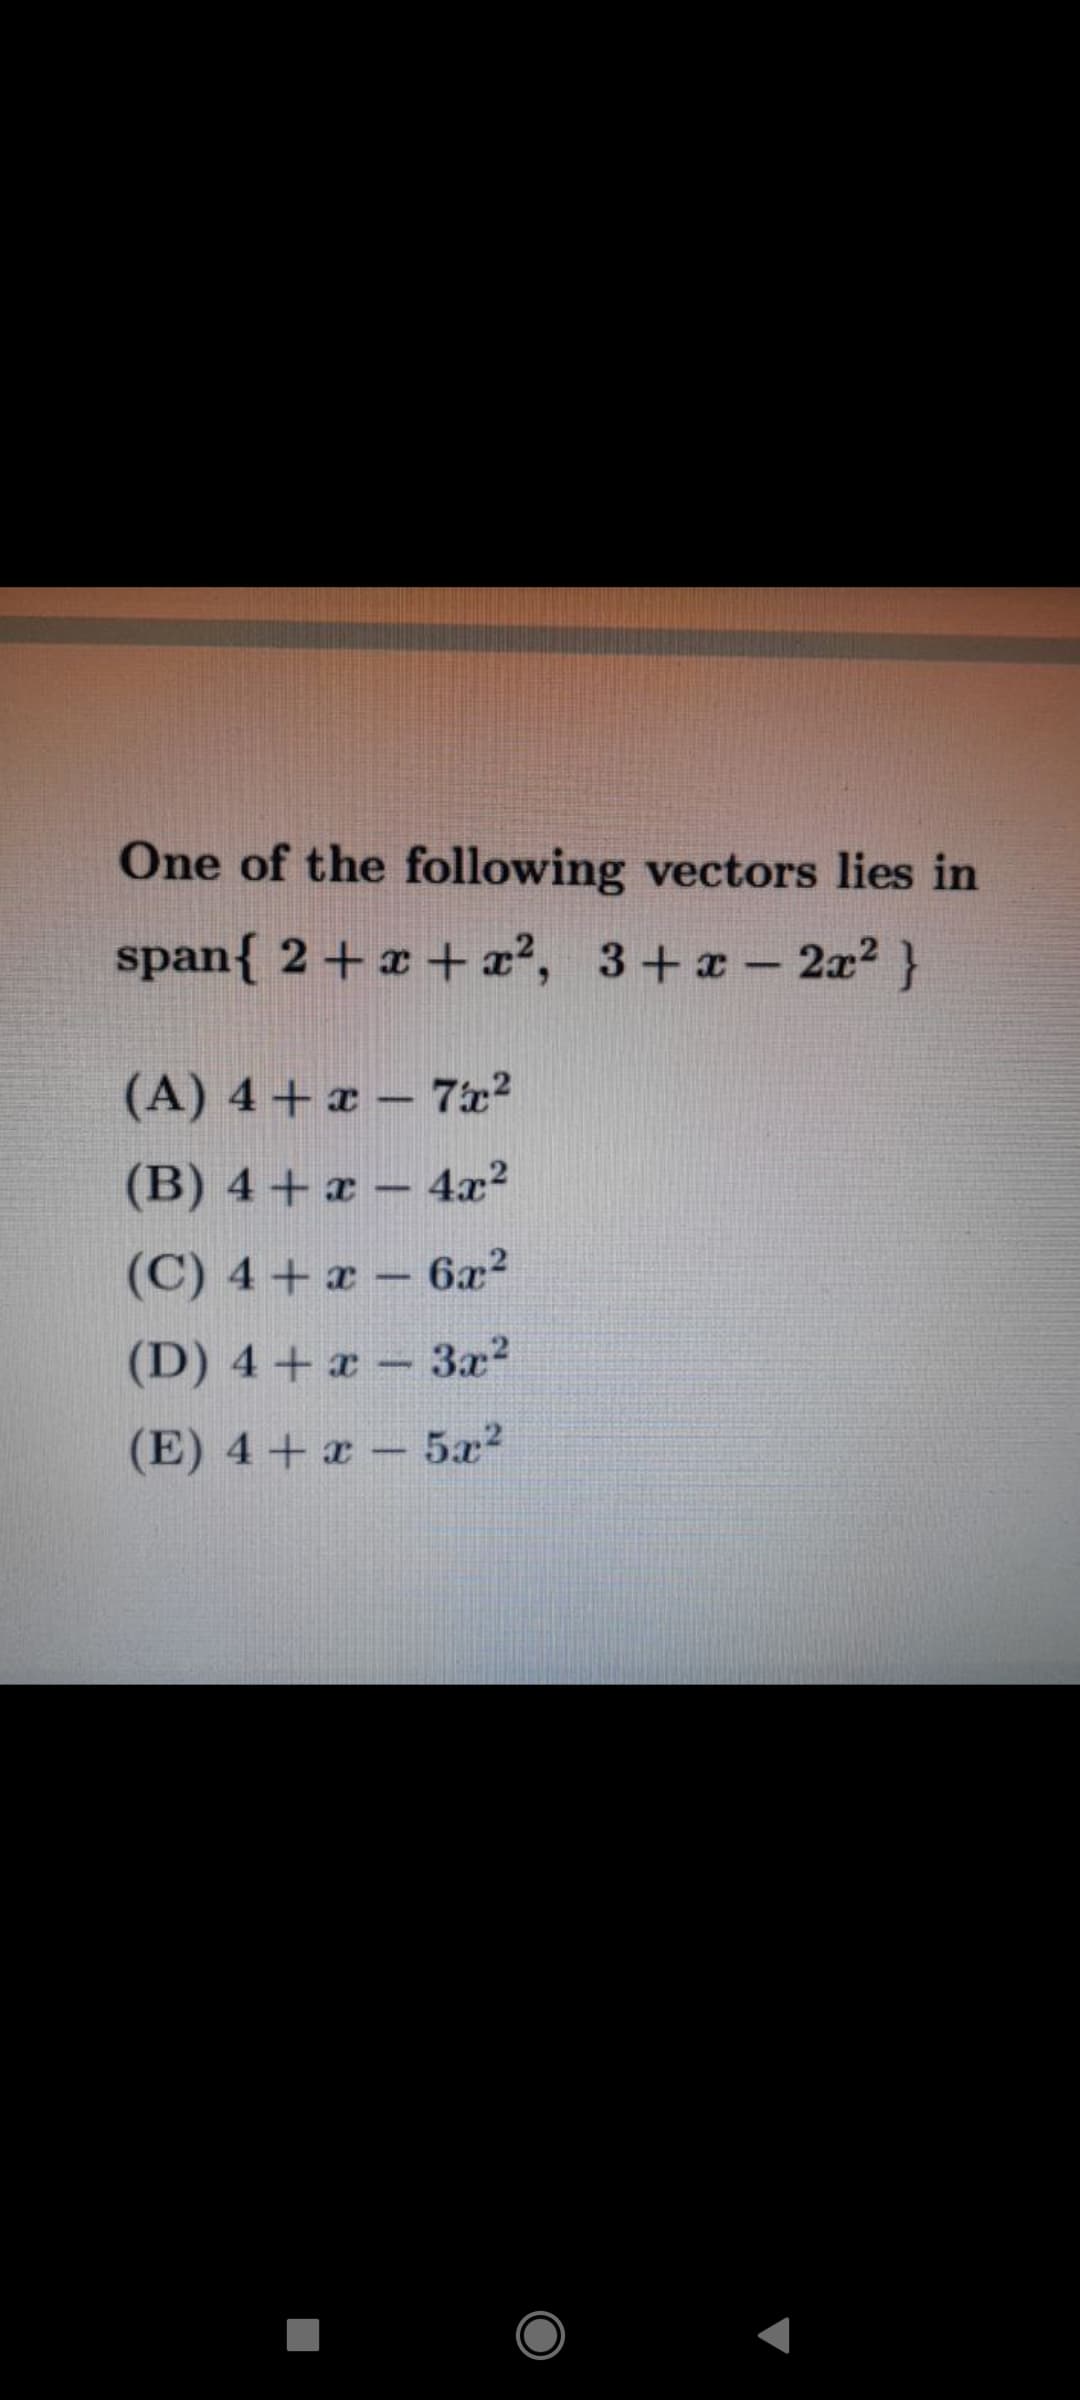 One of the following vectors lies in
span{ 2+x + æ?, 3+-
2x2 }
(A) 4+ x - 7x?
(B) 4+ x – 4x?
(C) 4+ x-6x?
(D) 4 +x - 3a?
(E) 4+ x- 5a2
